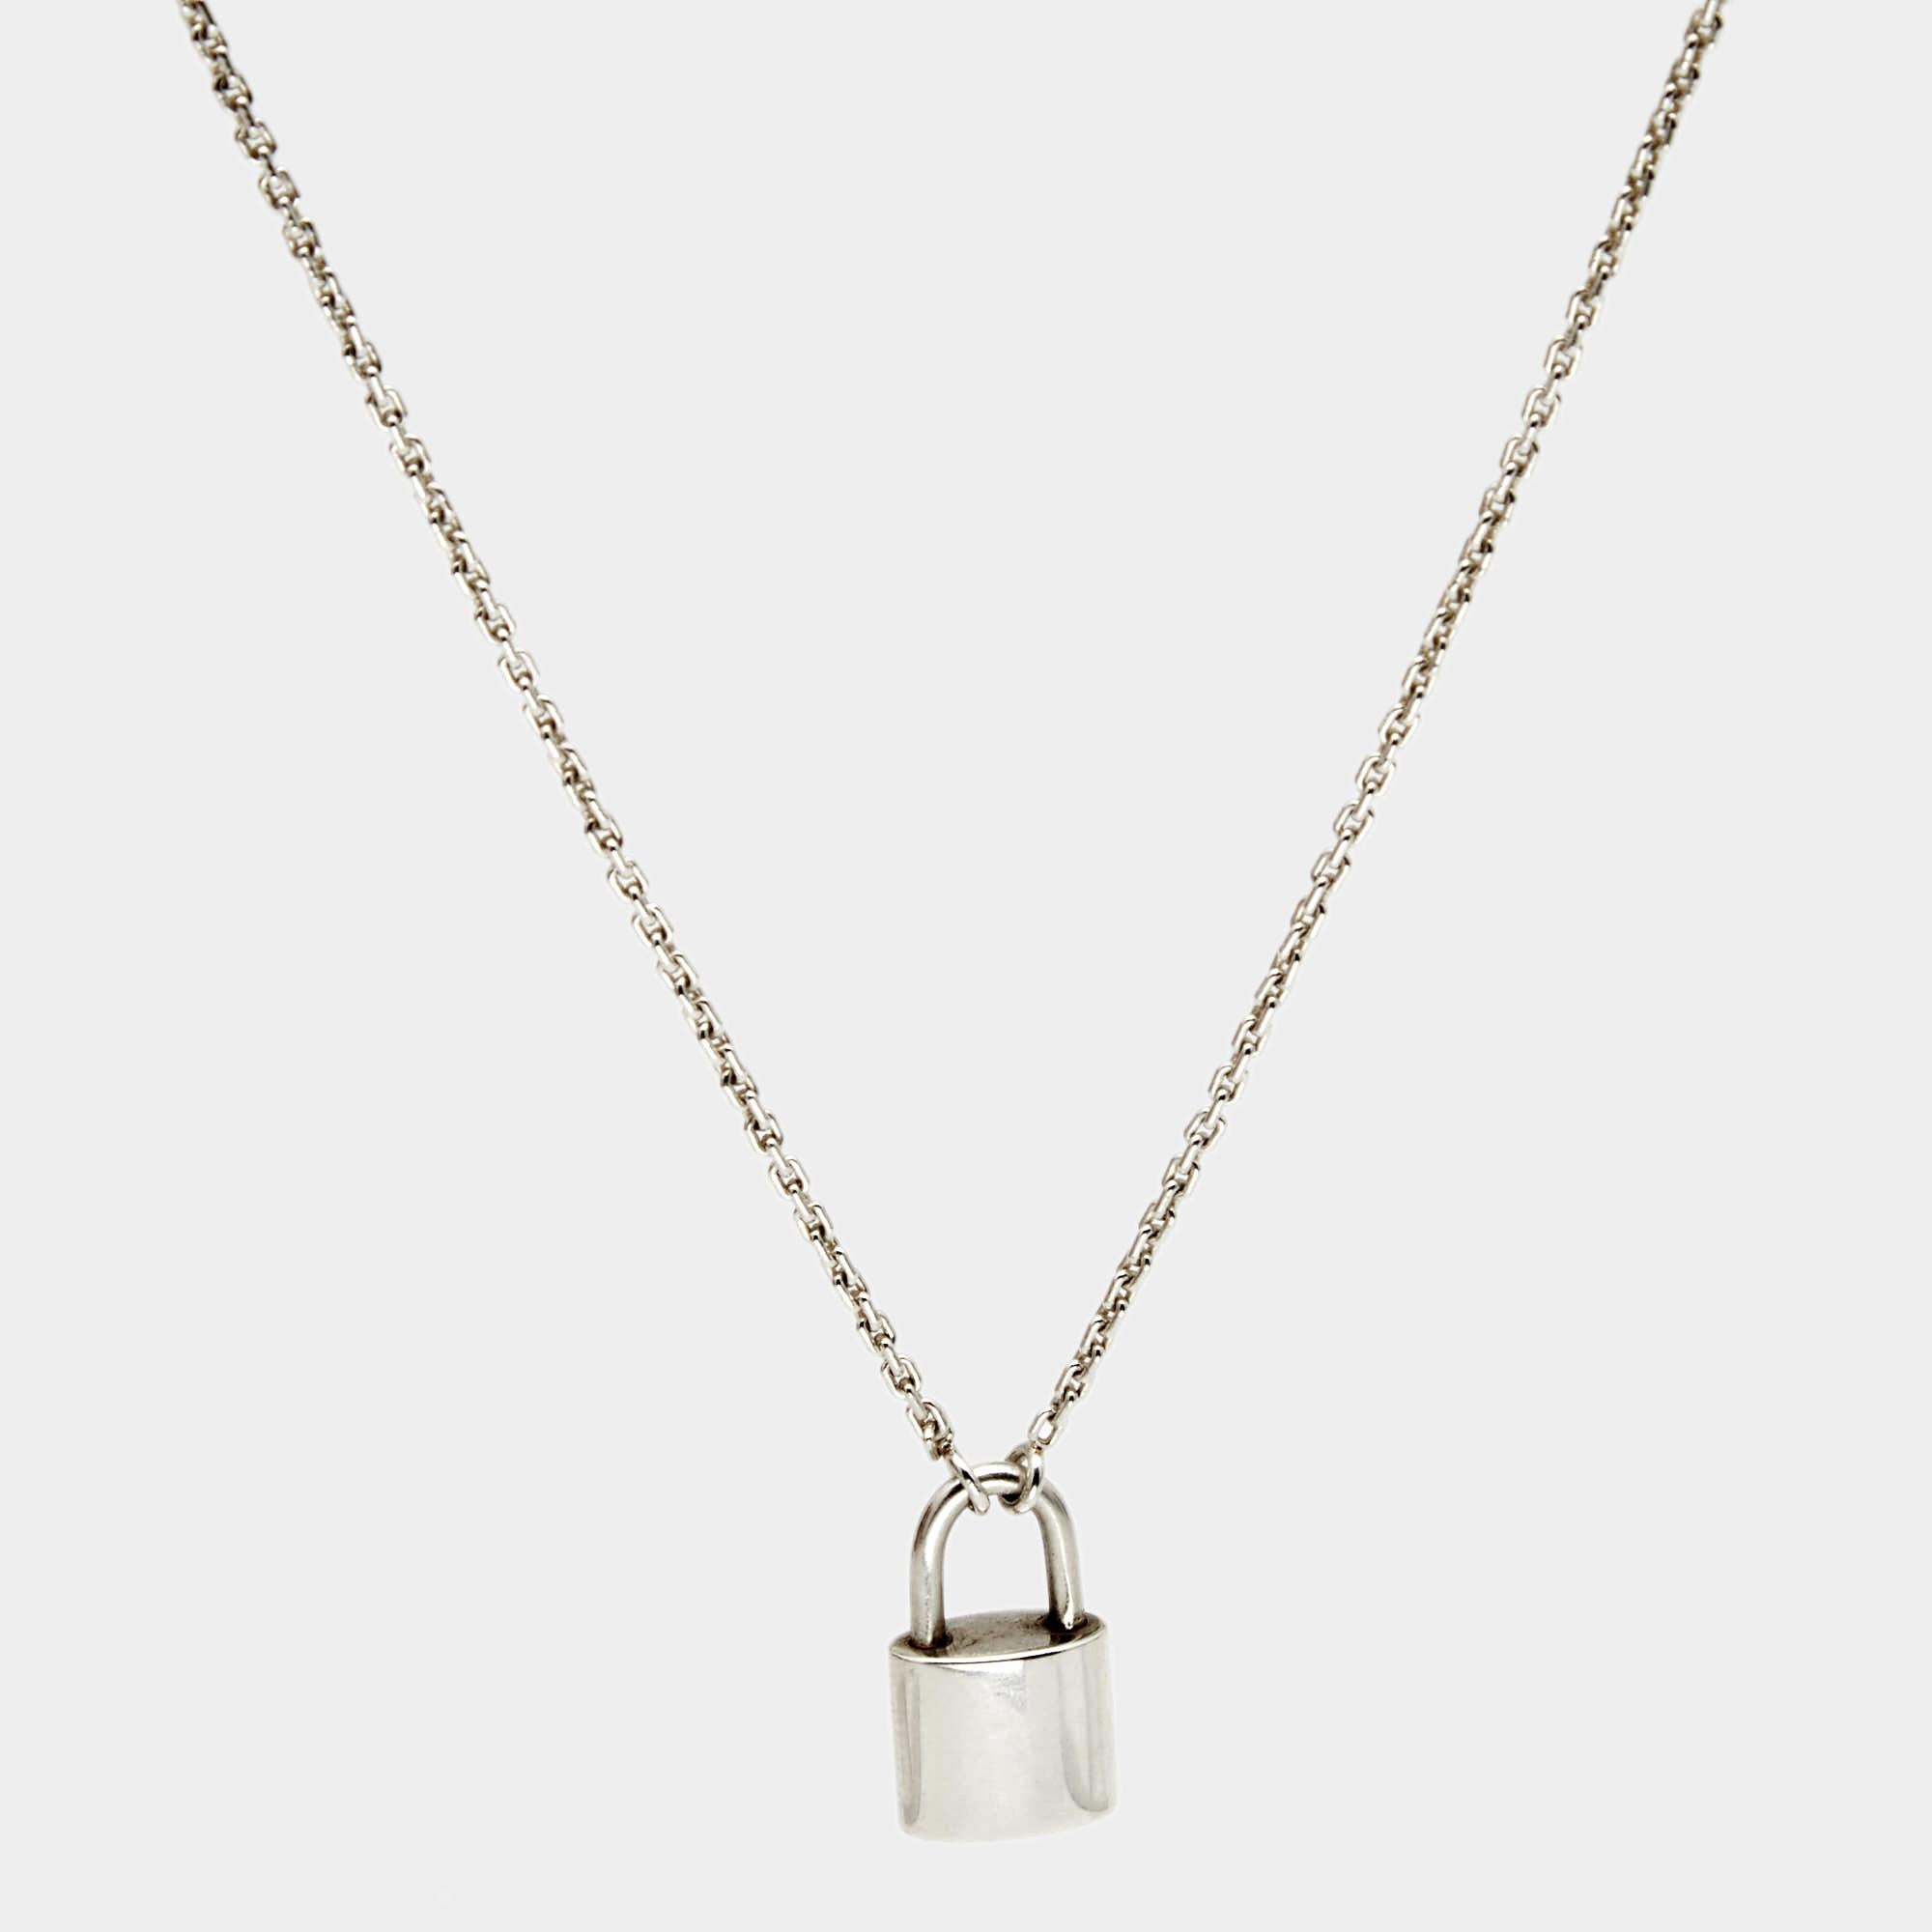 As a philanthropic endeavor, Louis Vuitton collaborated with UNICEF to create the Lockit line designed by Virgil Abloh. Sculpted from sterling silver, this chain-link necklace is held by an LV engraved padlock inspired by the lock created by Georges